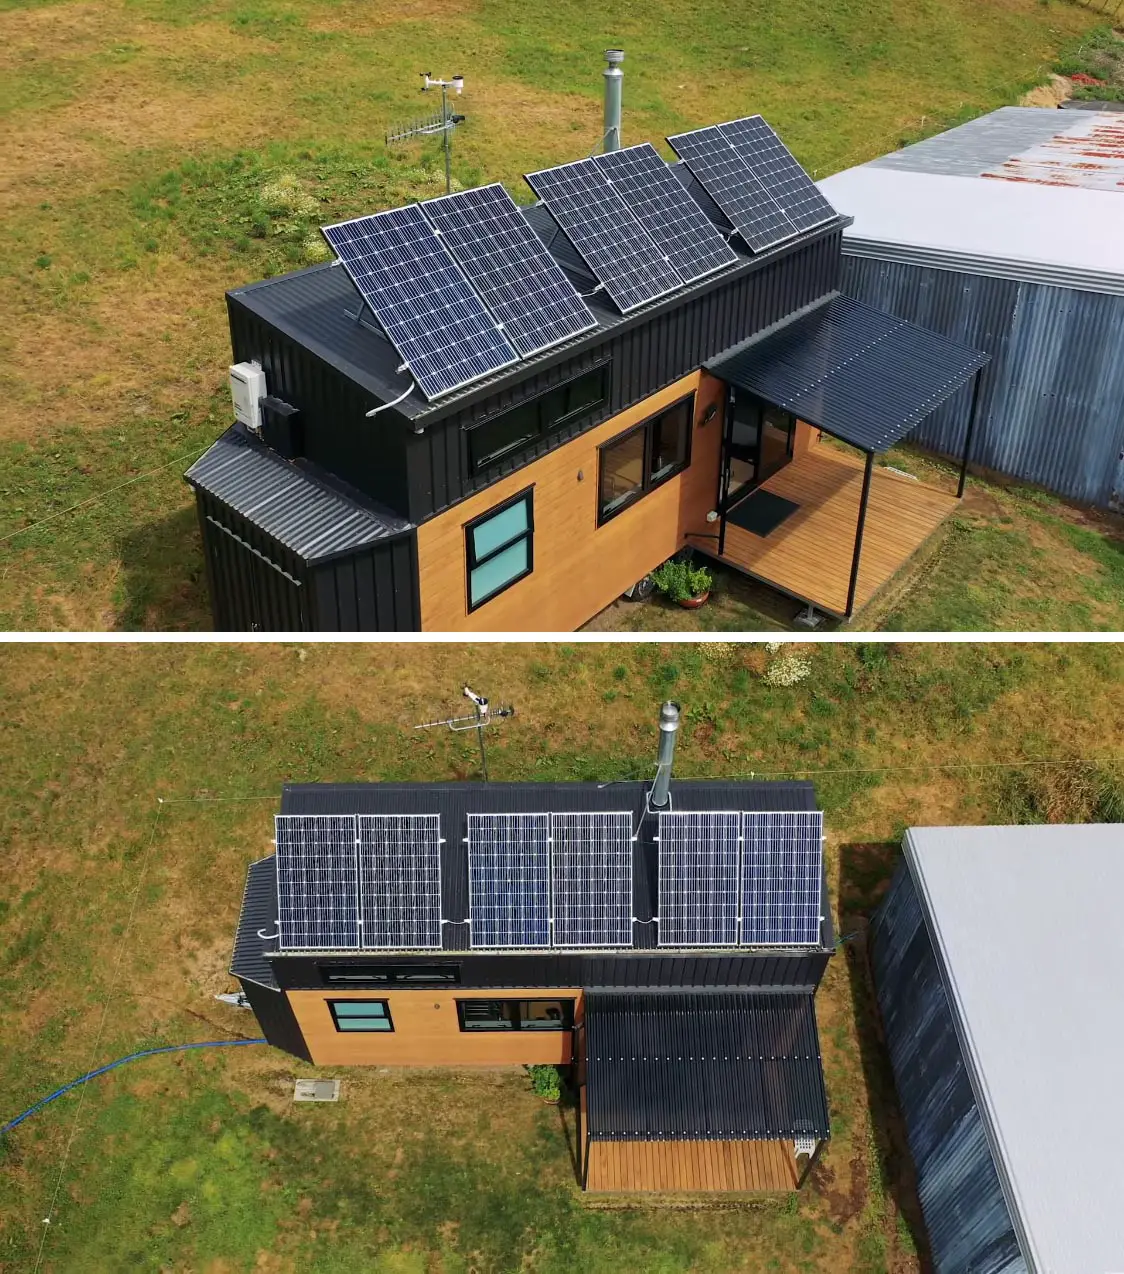 Solar Panels On The Roof Allow This Tiny House To Go Off The Grid